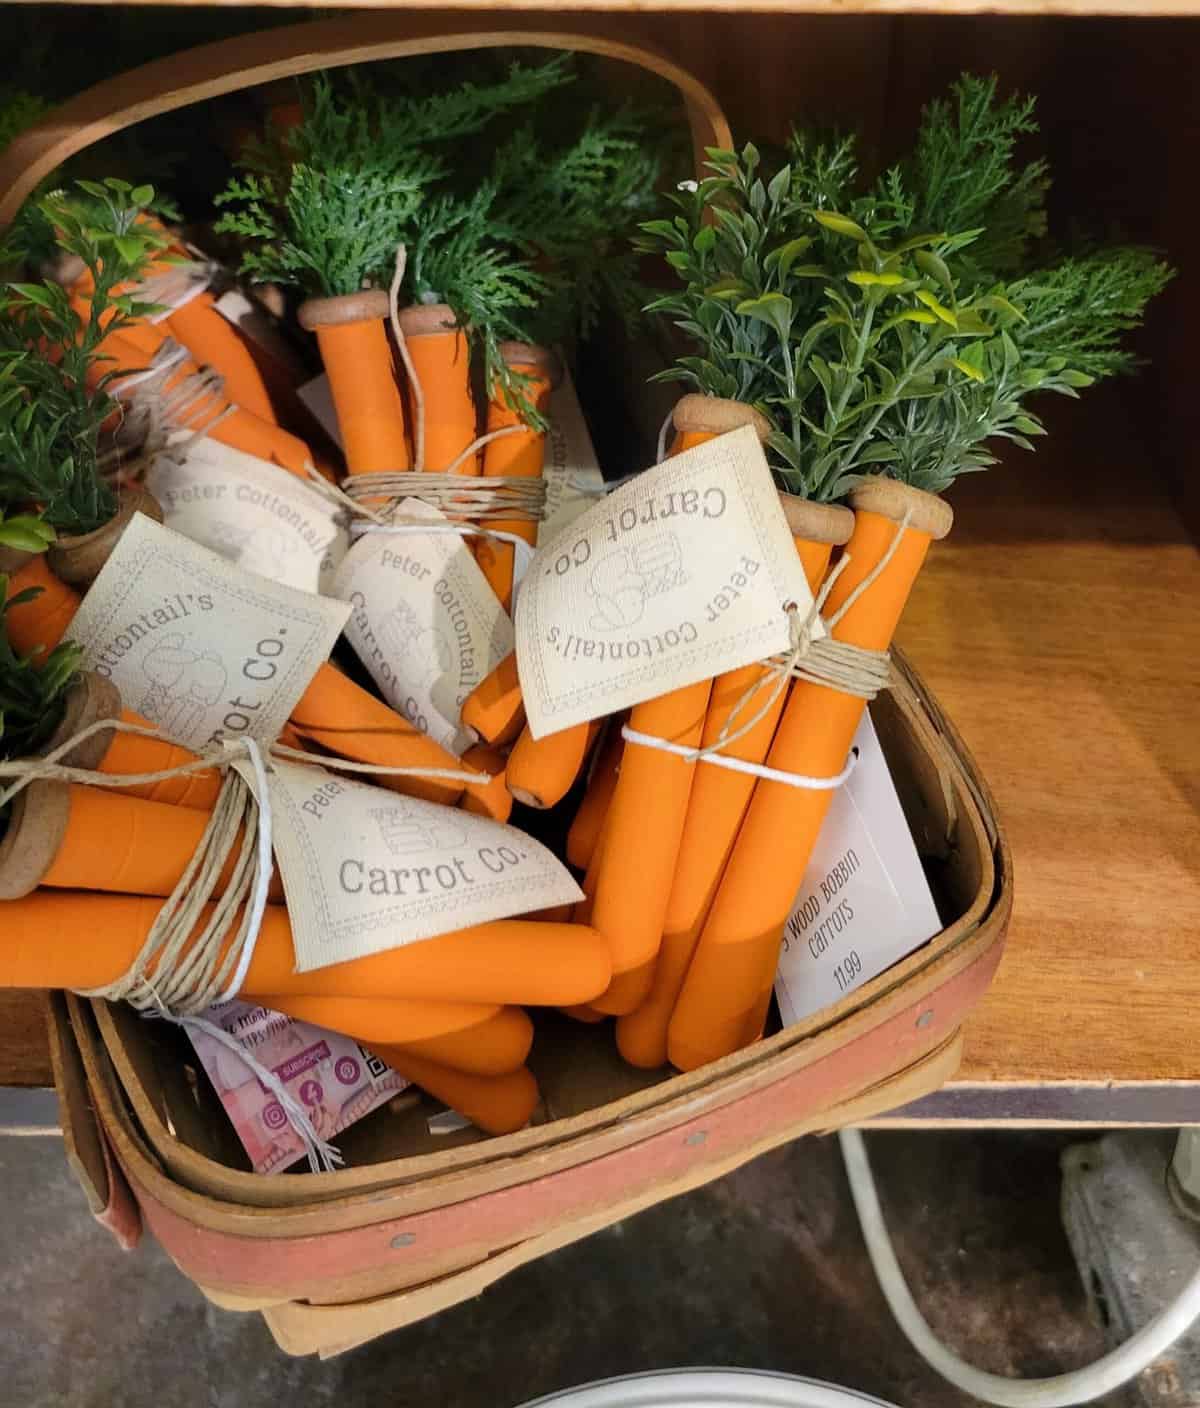 A basket filled with artificial carrot decorations made of fabric, arranged to resemble a bunch of harvested carrots, complete with faux greenery to mimic the tops.